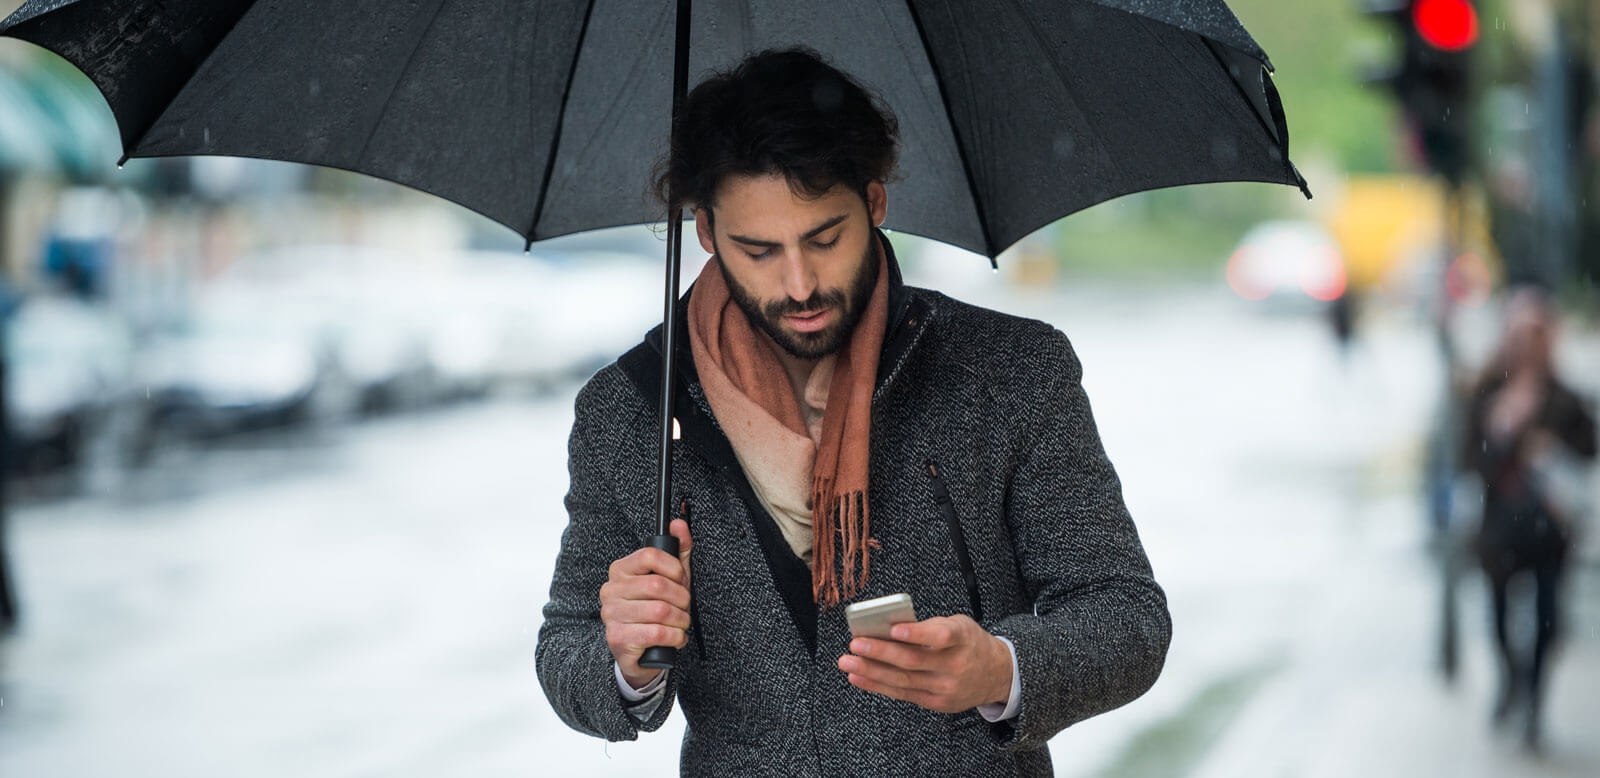 man with phone and umbrella